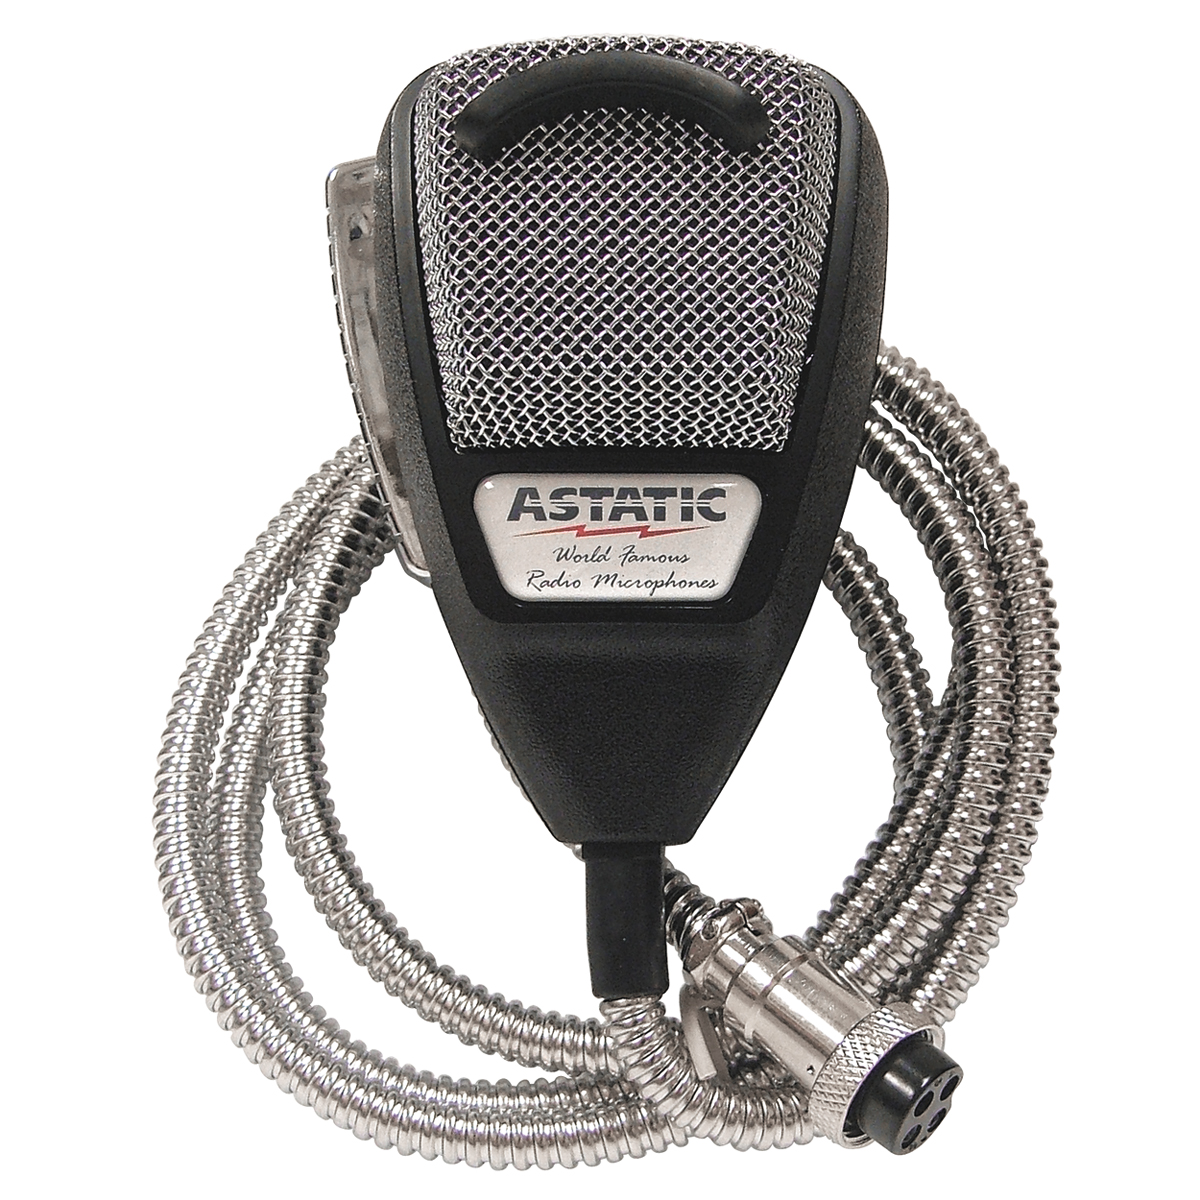 Astatic 636LSE Noise Canceling 4-Pin CB Microphone, Silver ... auto wire diagram 